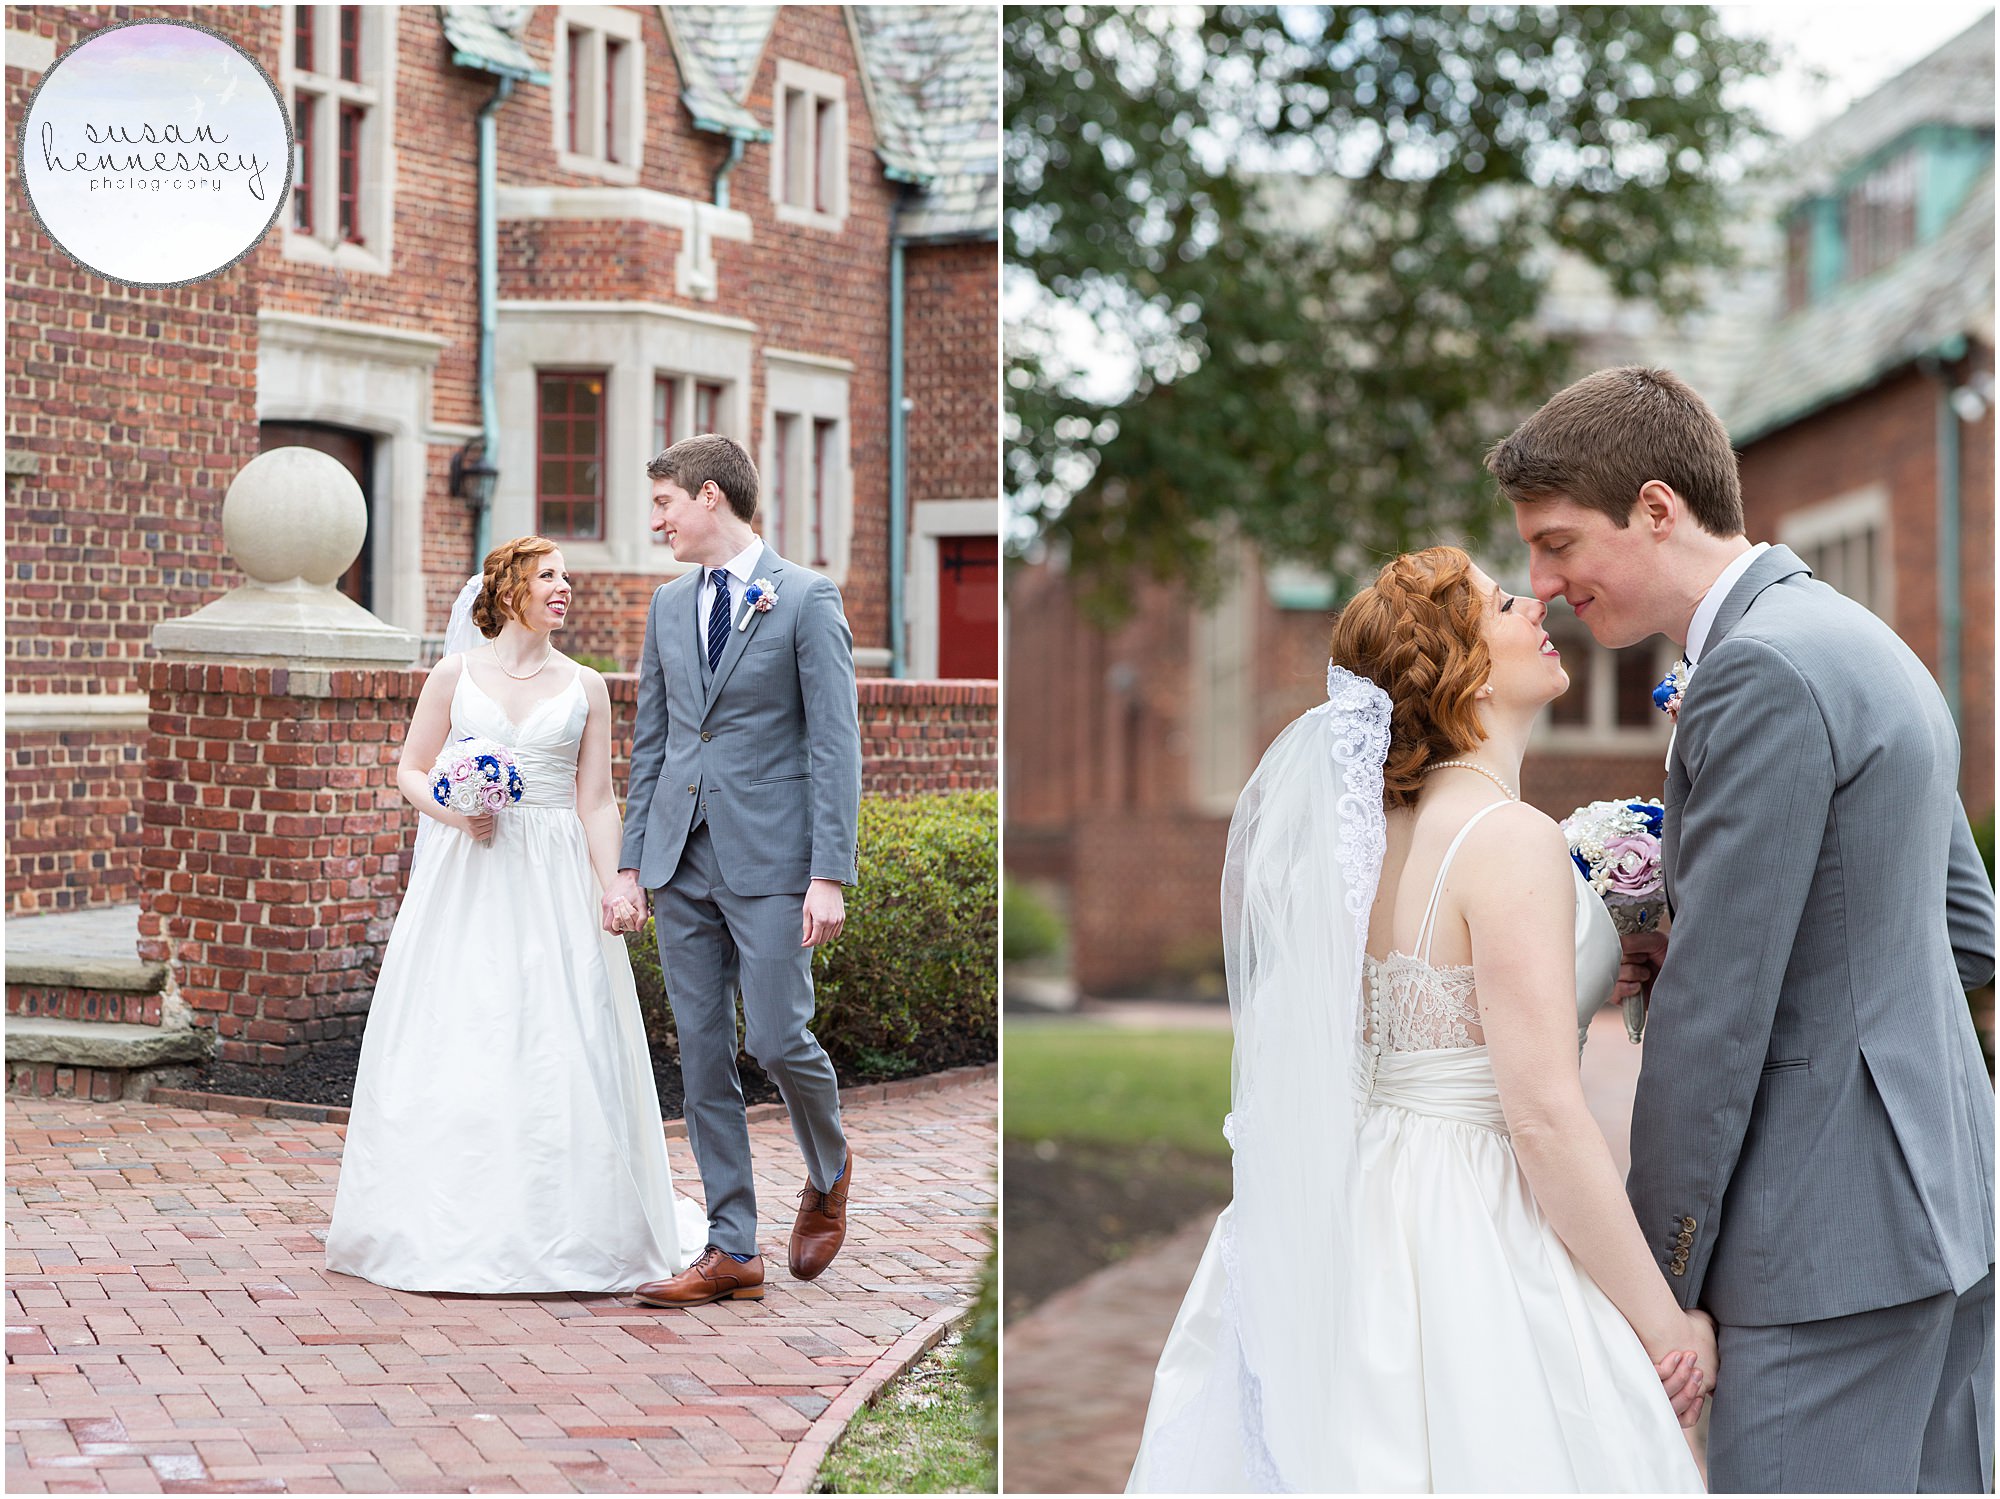 Susan Hennessey Photography Best of 2020 Weddings - The Community House of Moorestown bride and groom portraits in front of historic building